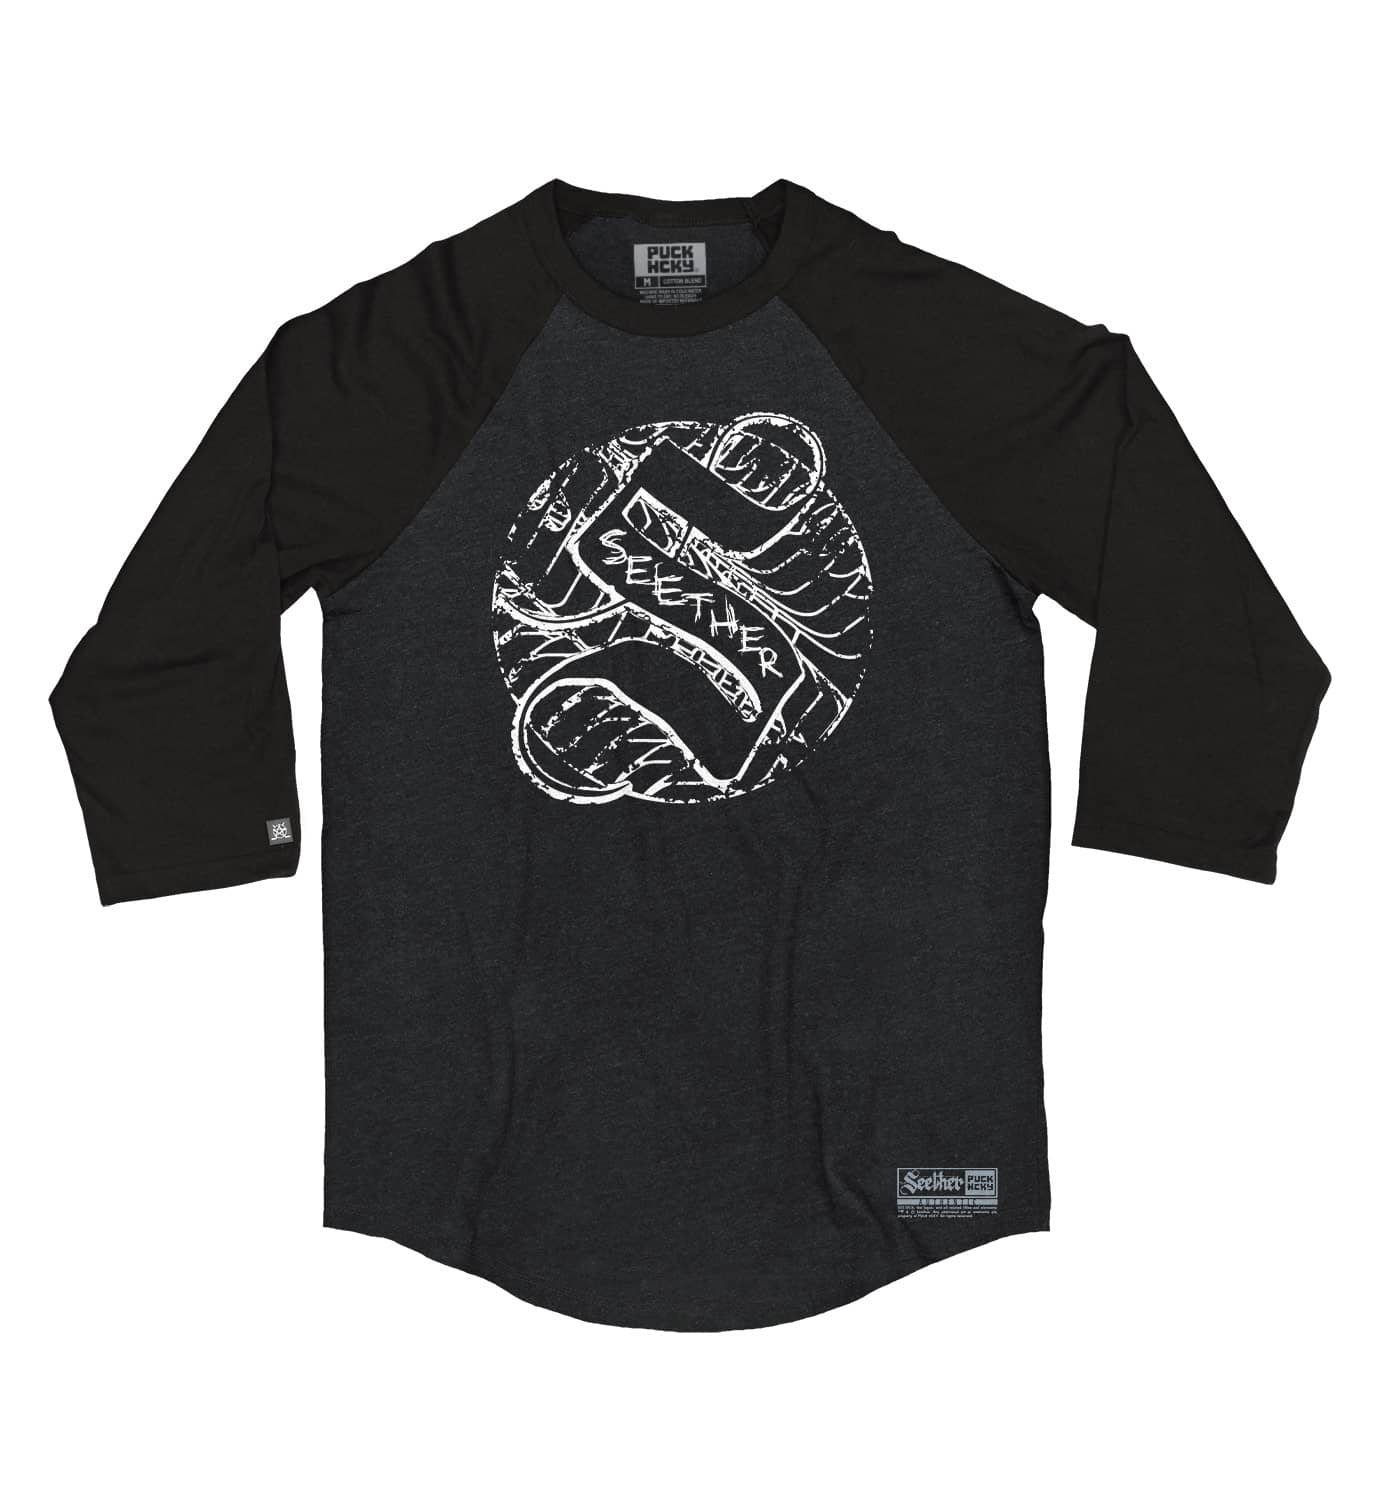 SEETHER 'THE S' hockey raglan t-shirt in graphite heather with black sleeves front view